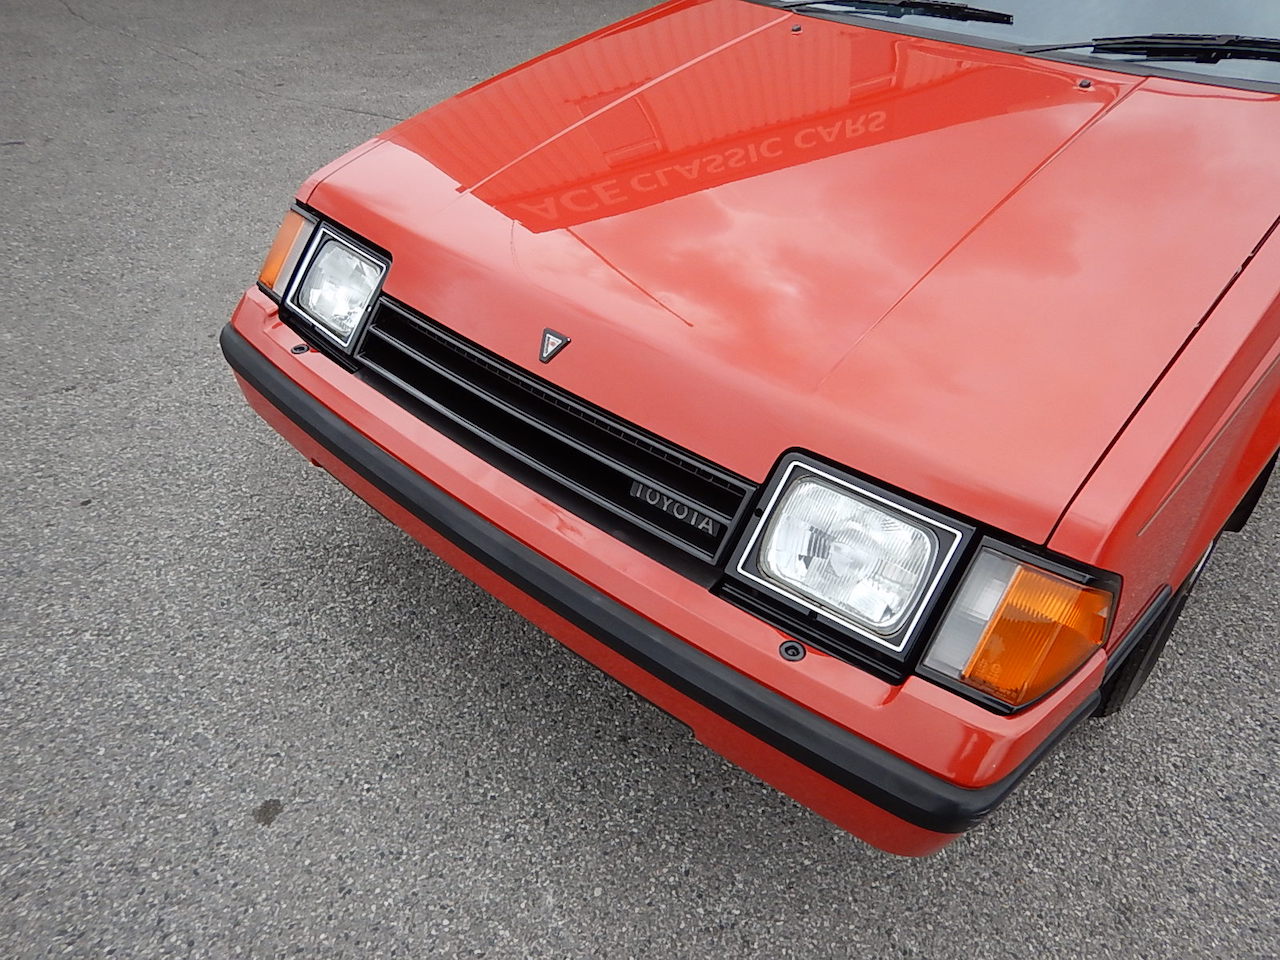 Take to the Road Feature 1983 Toyota Celica 2ltr ST